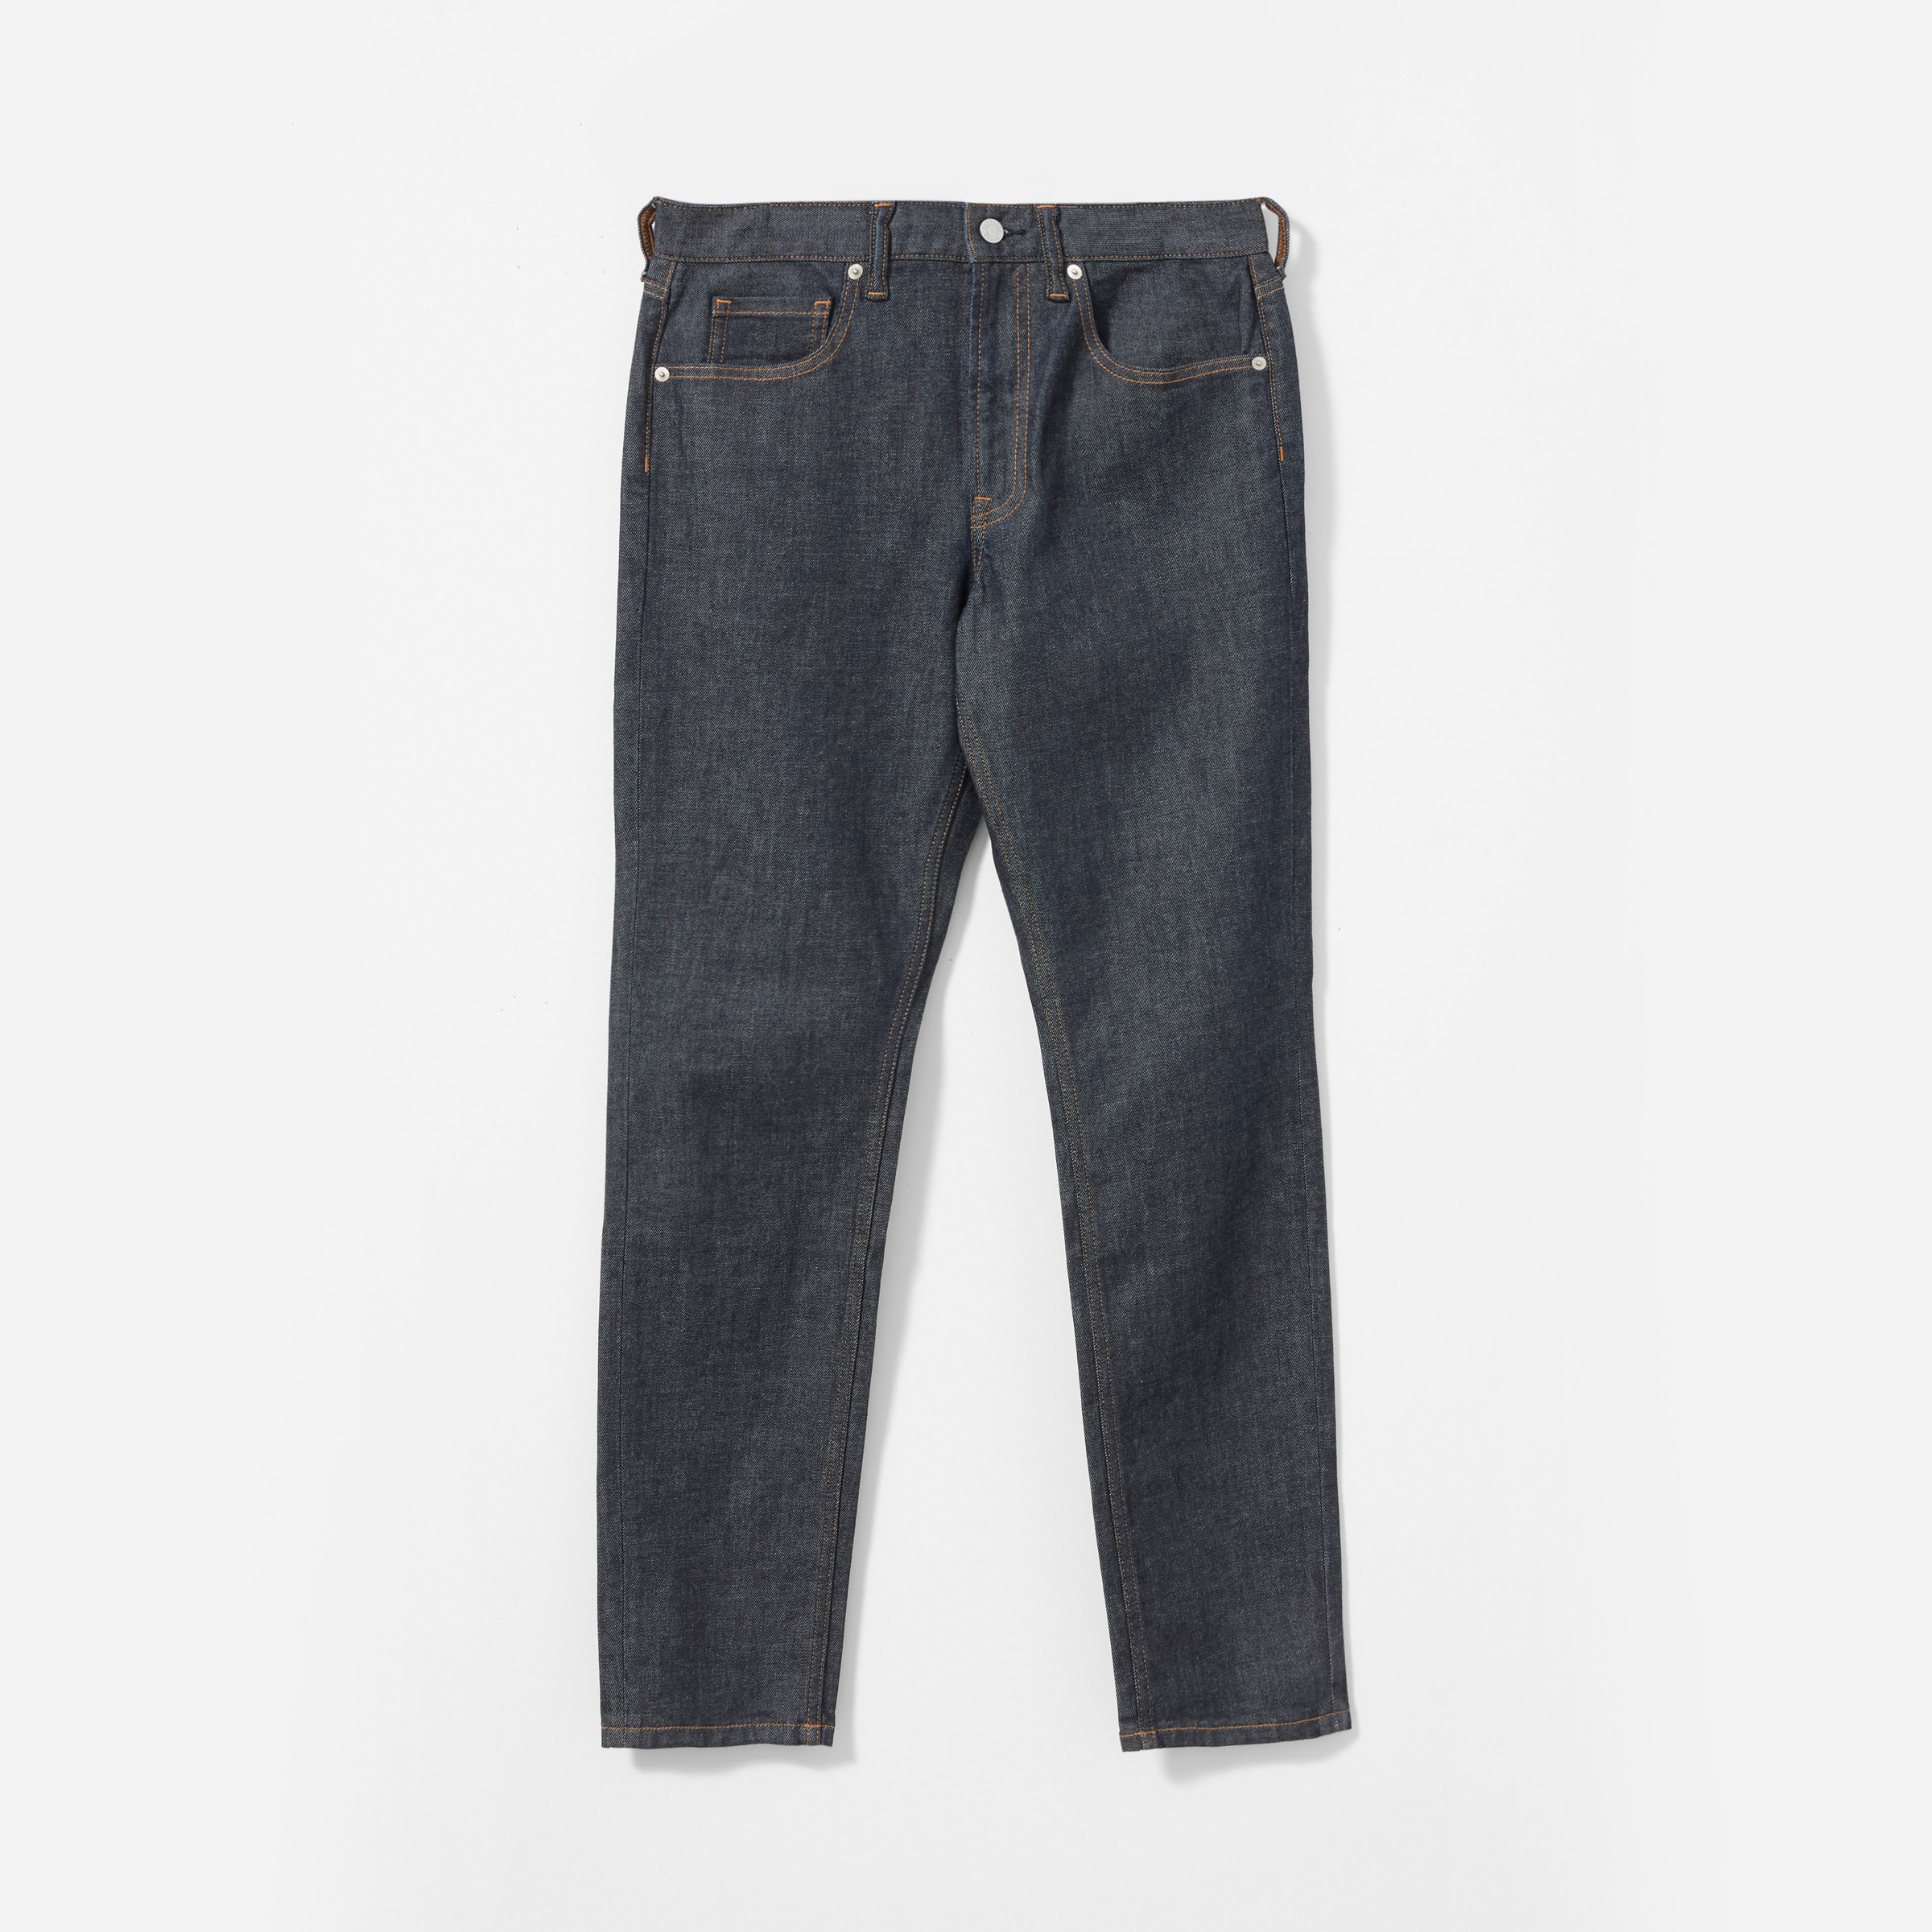 The Athletic Fit Jean, 60% OFF